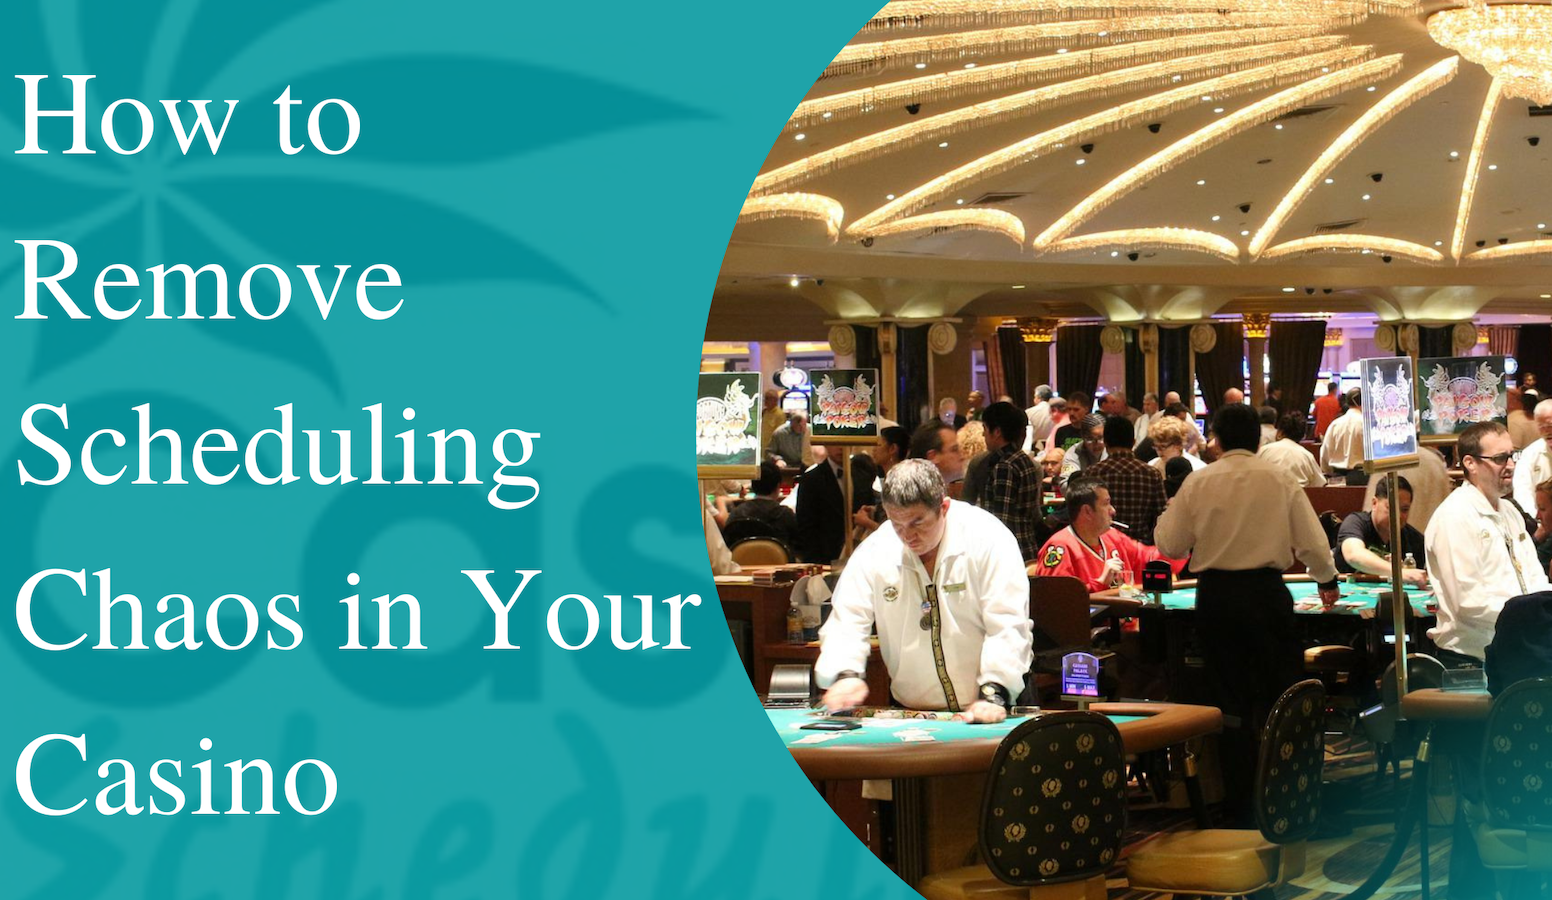 How to Remove Employee Scheduling Chaos in Your Casino